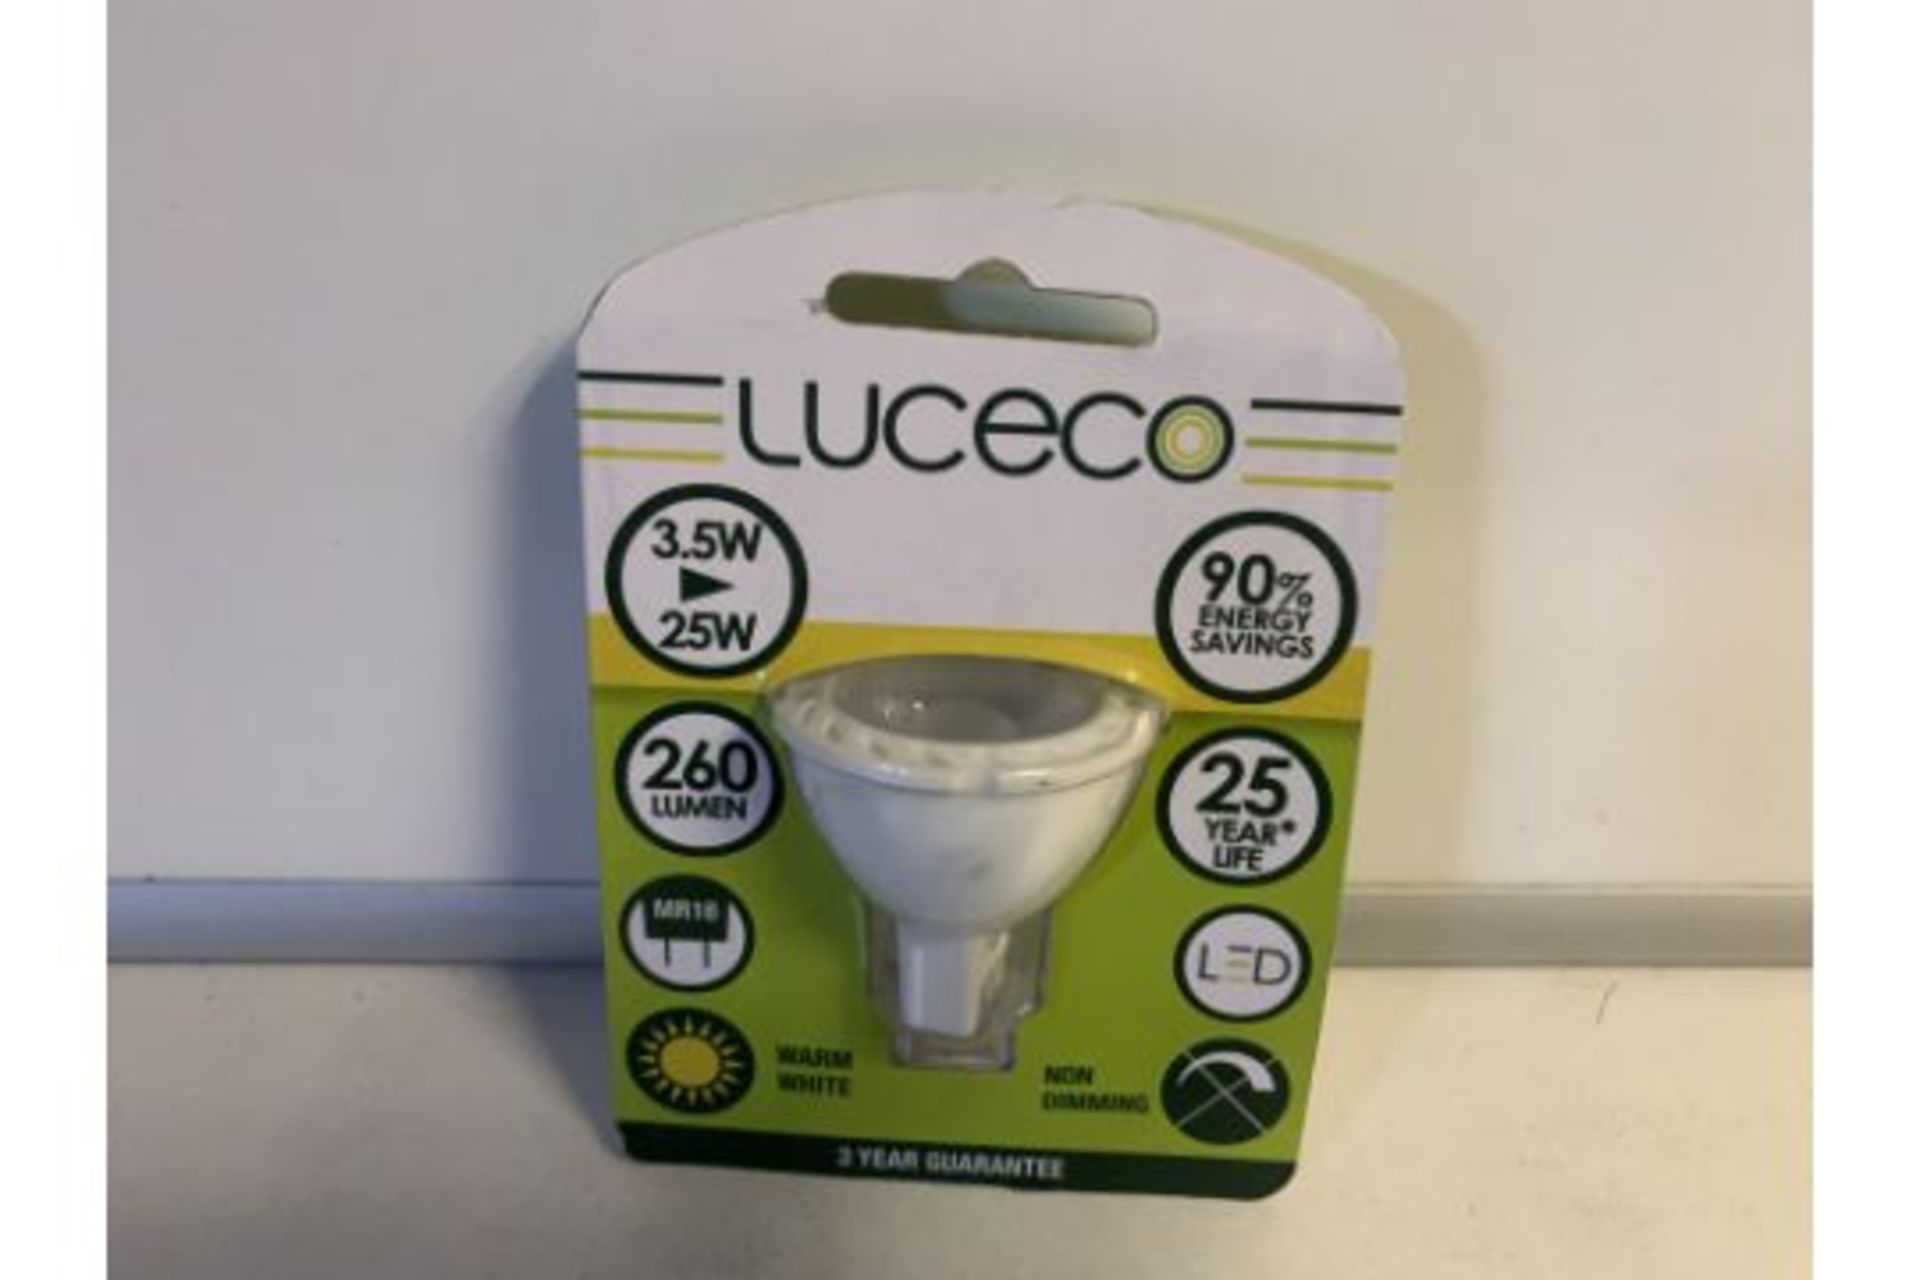 50 X NEW PACKAGED LUCECO LED MR16 LIGHT BULBS. 3.5w=25w. WARM WHITE. RRP £10 EACH